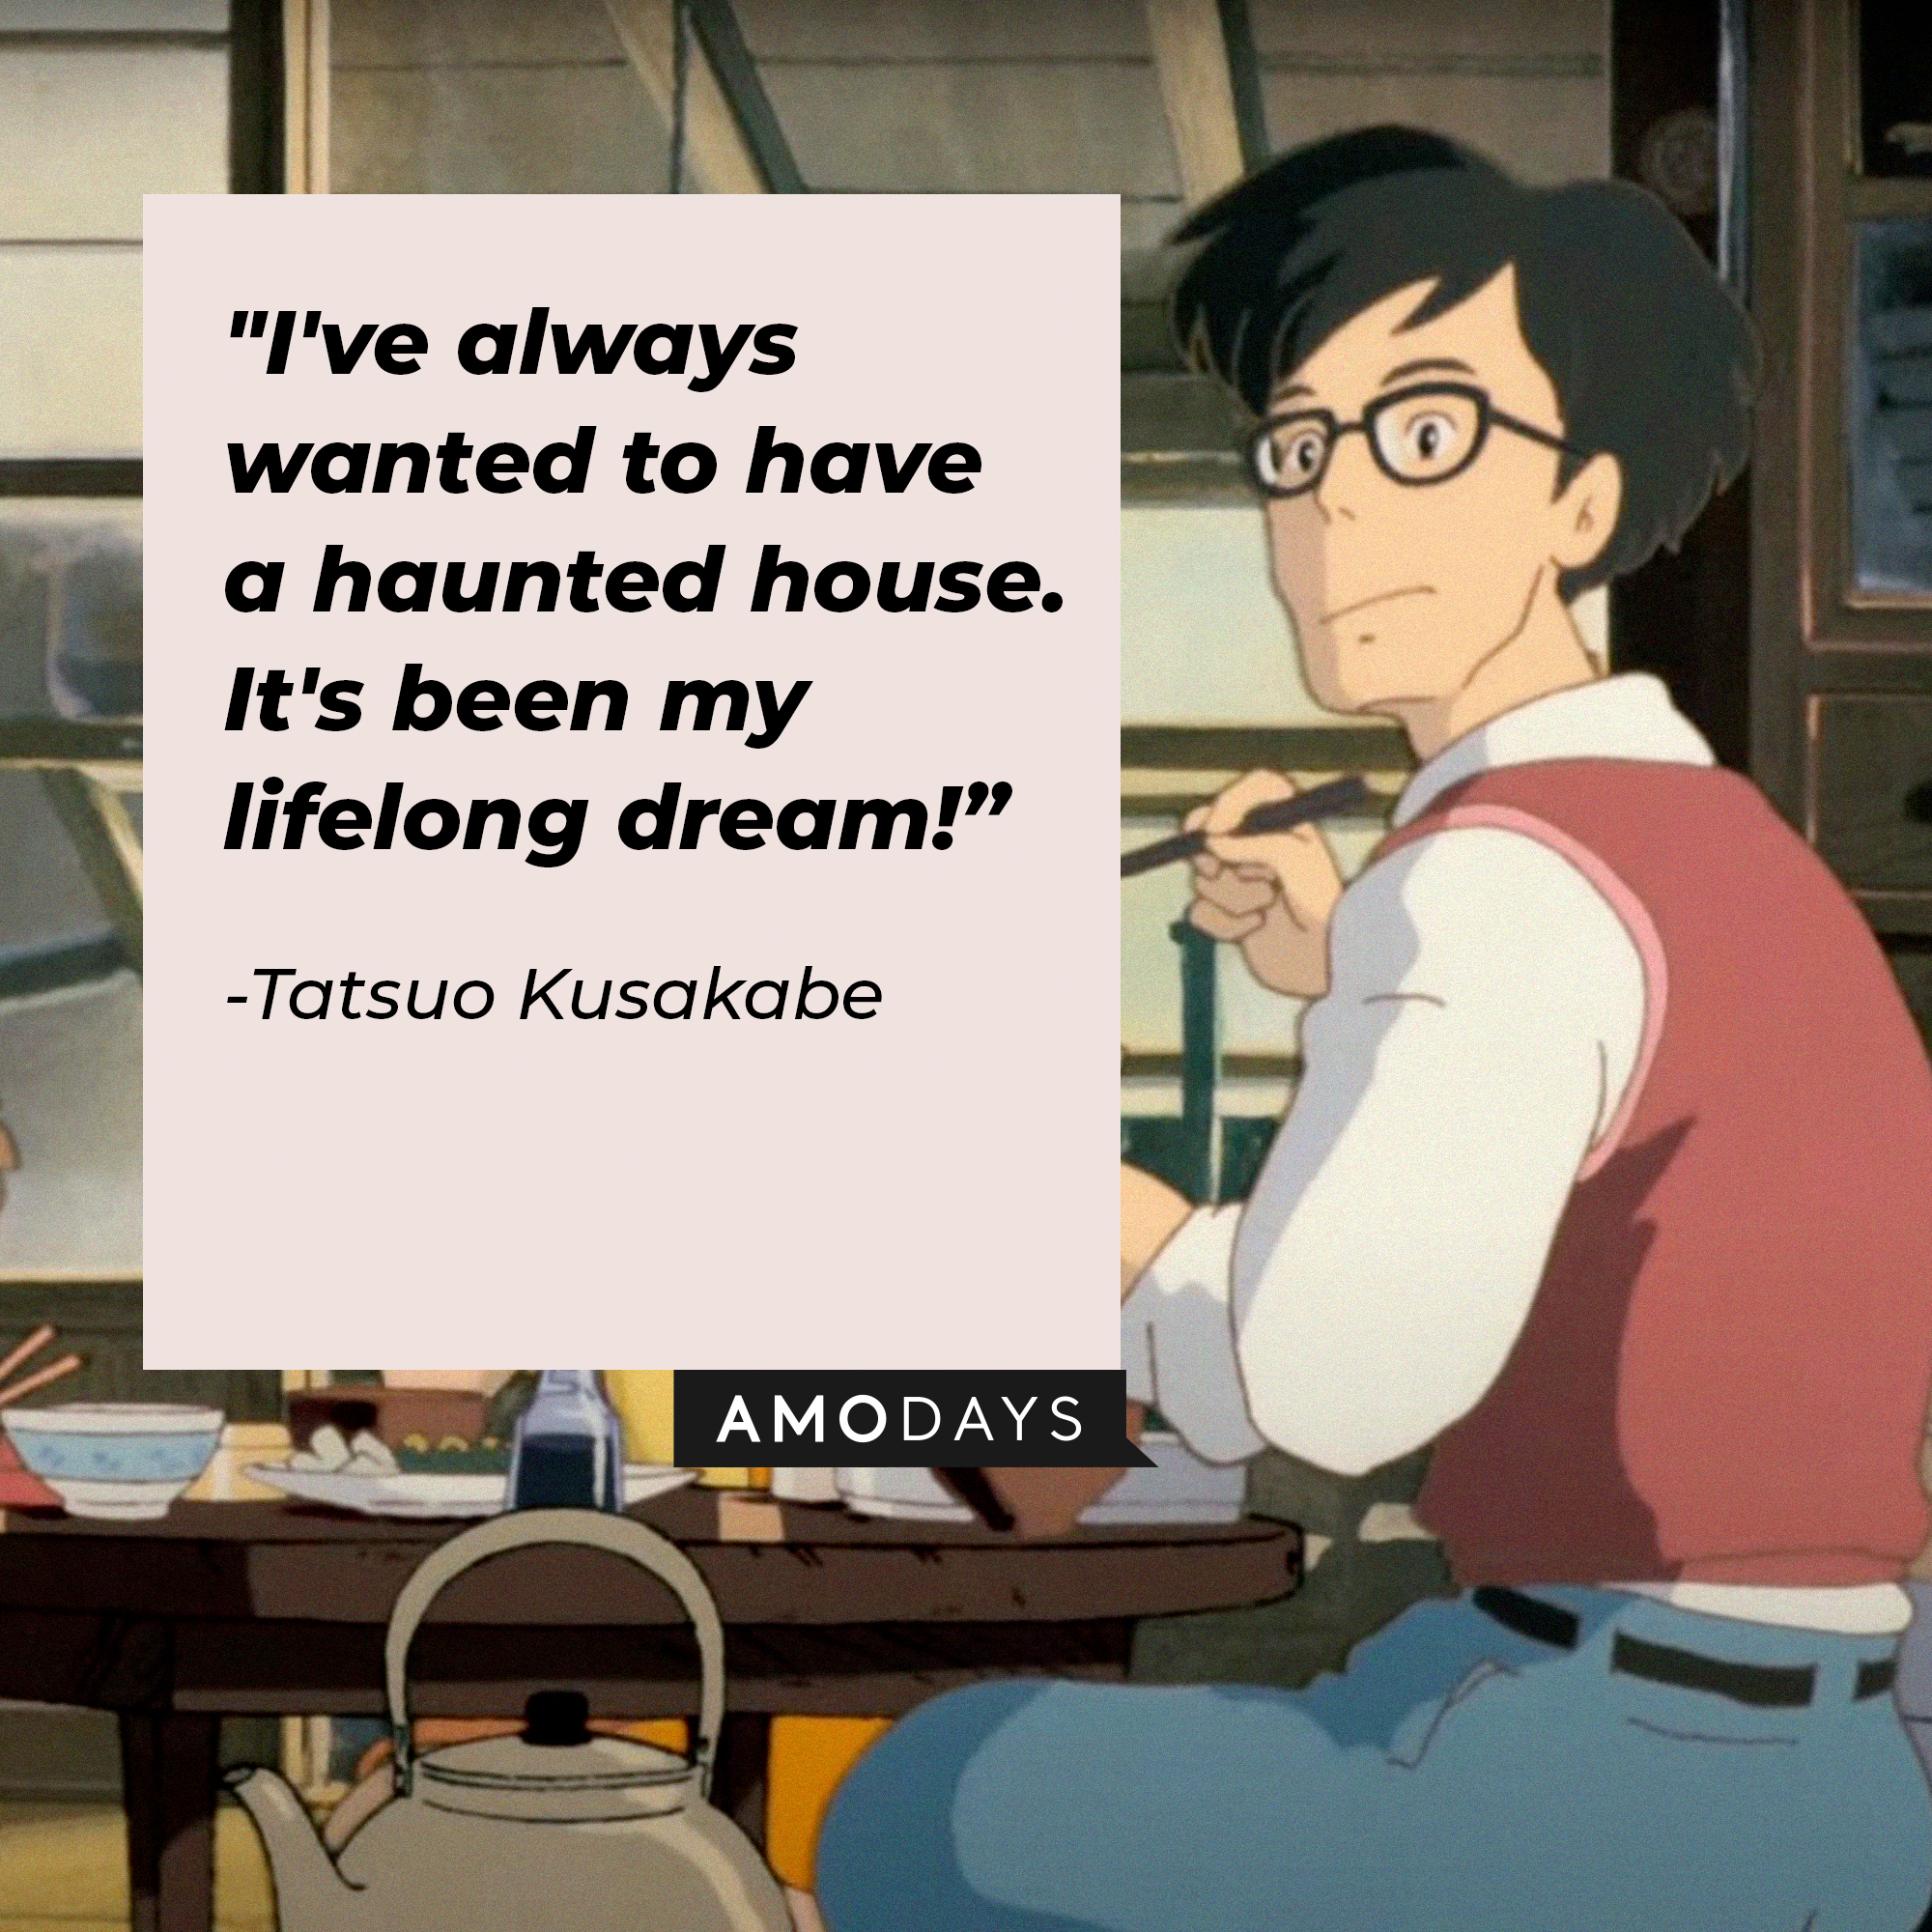 An image of Tatsuo Kusakabe with his quote: "I've always wanted to have a haunted house. It's been my lifelong dream!” | Source: facebook.com/GhibliUSA